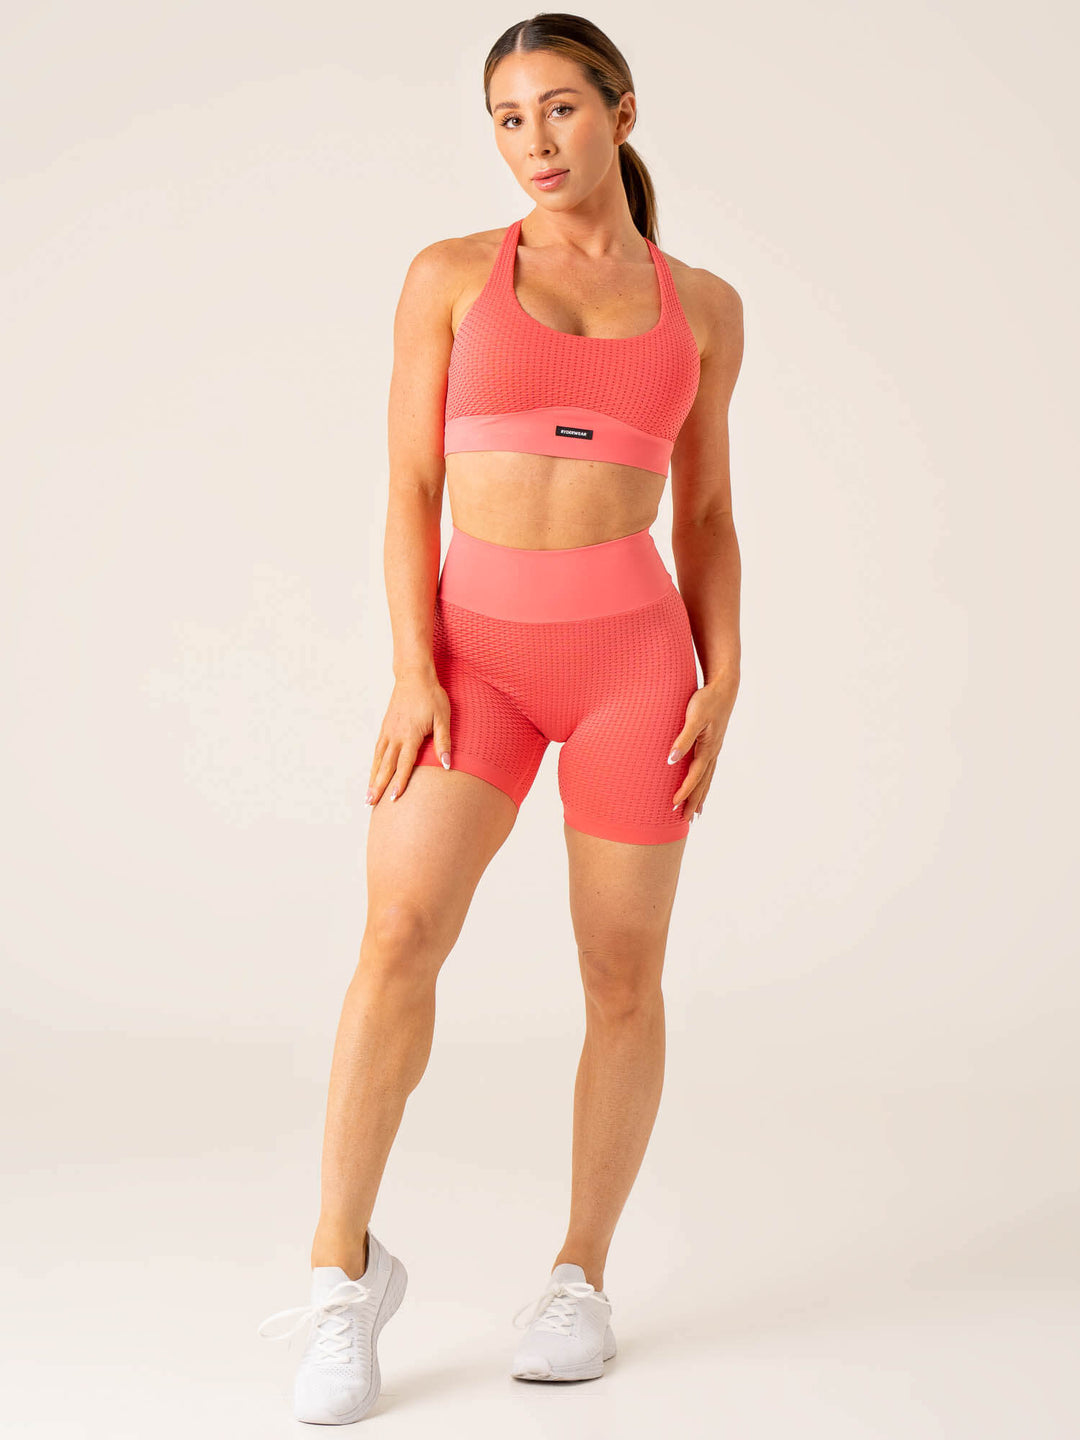 Honeycomb Scrunch Seamless Shorts - Coral Pink Clothing Ryderwear 